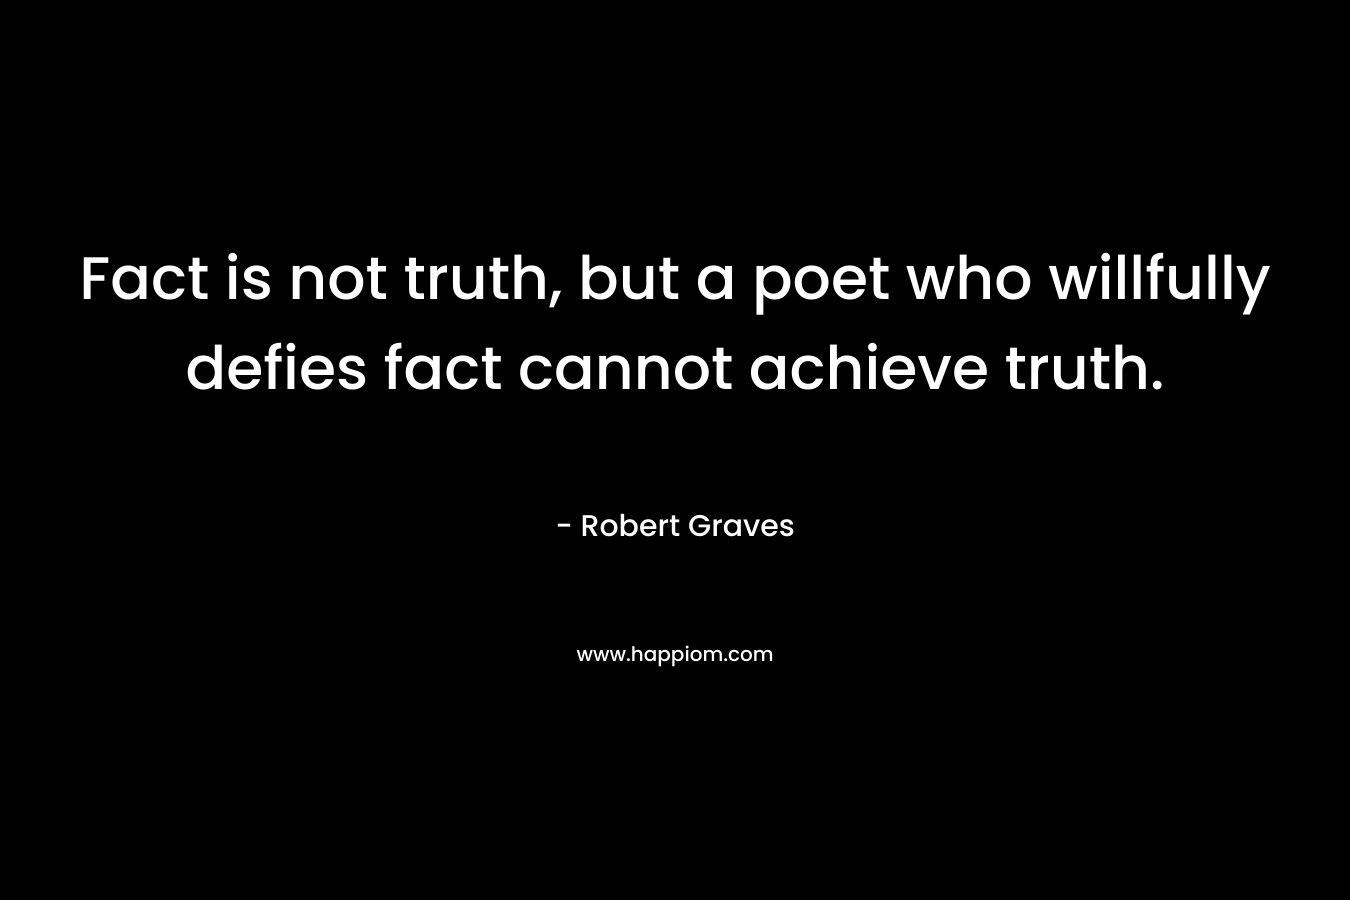 Fact is not truth, but a poet who willfully defies fact cannot achieve truth. – Robert Graves